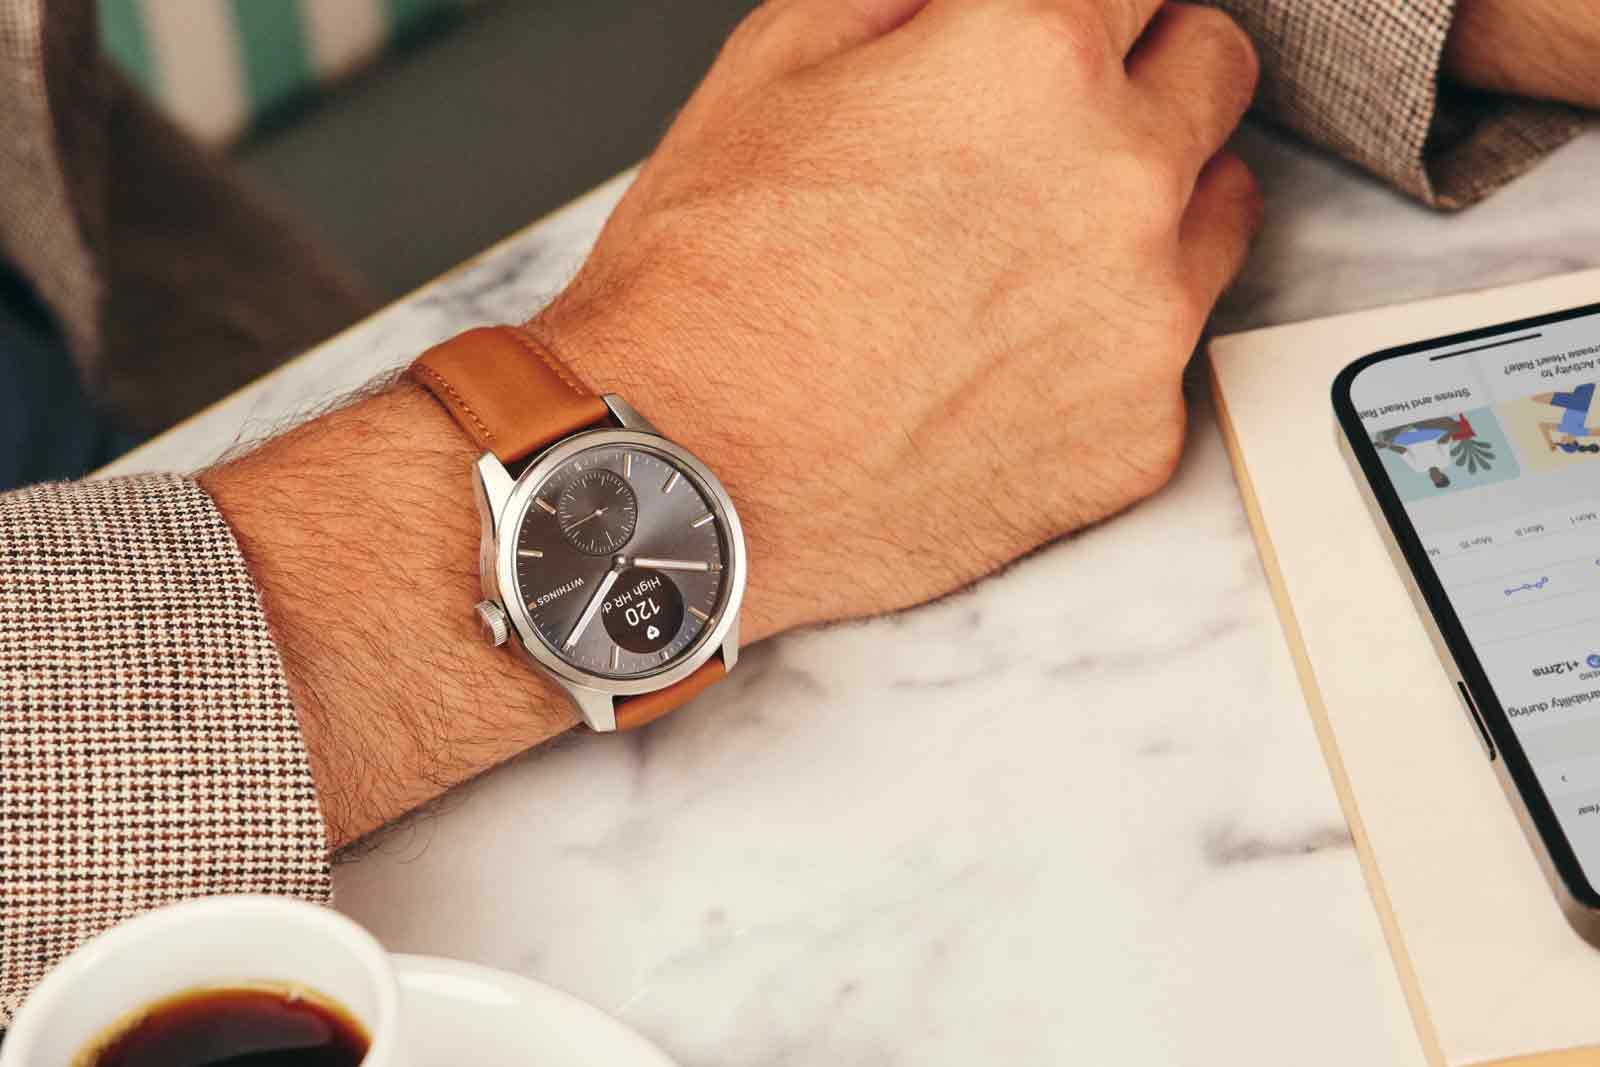 Withings’ new hybrid watches will rival Garmin with this hot new feature